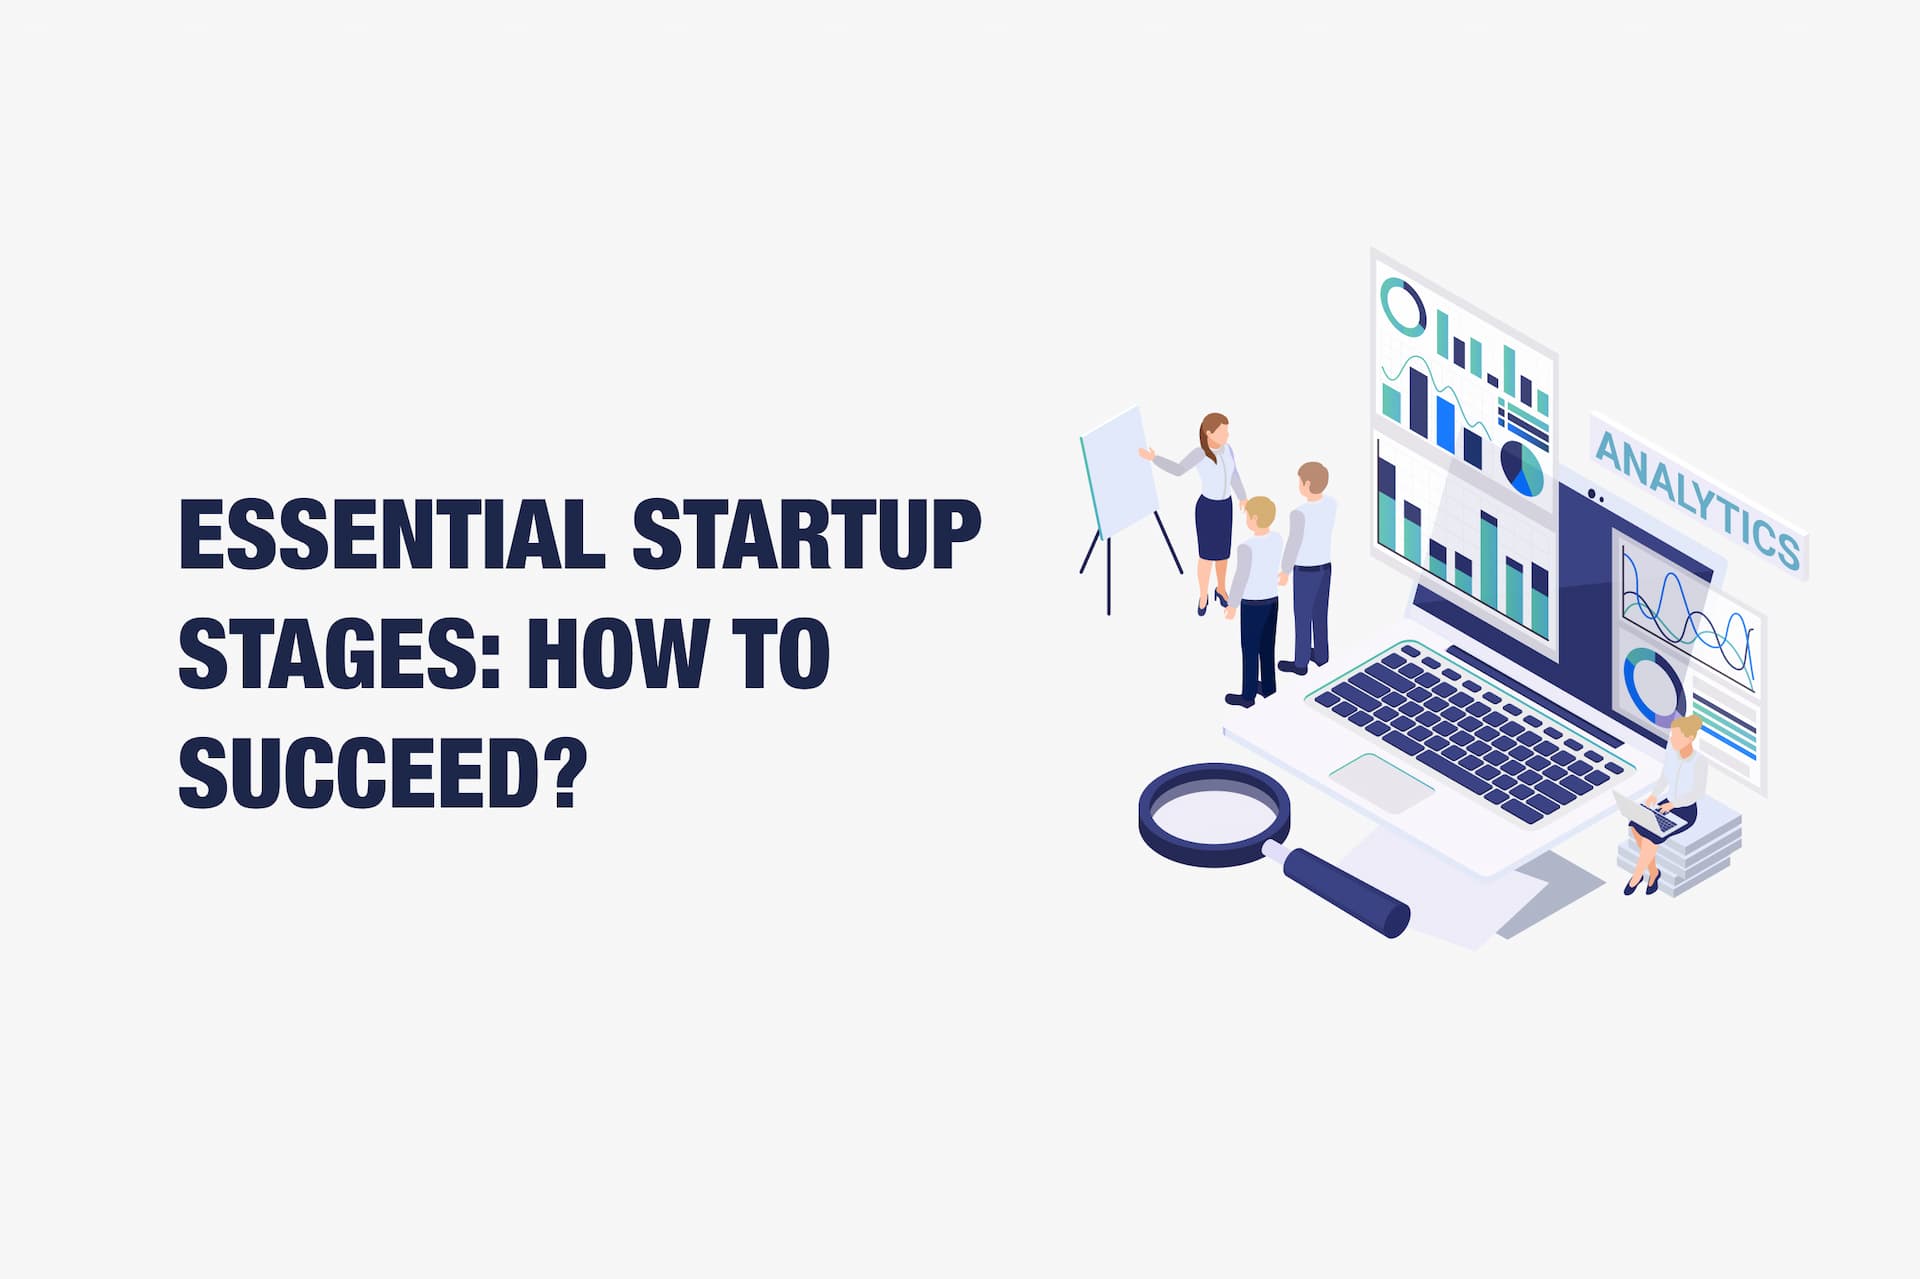 Essential Startup Stages: How to Succeed?